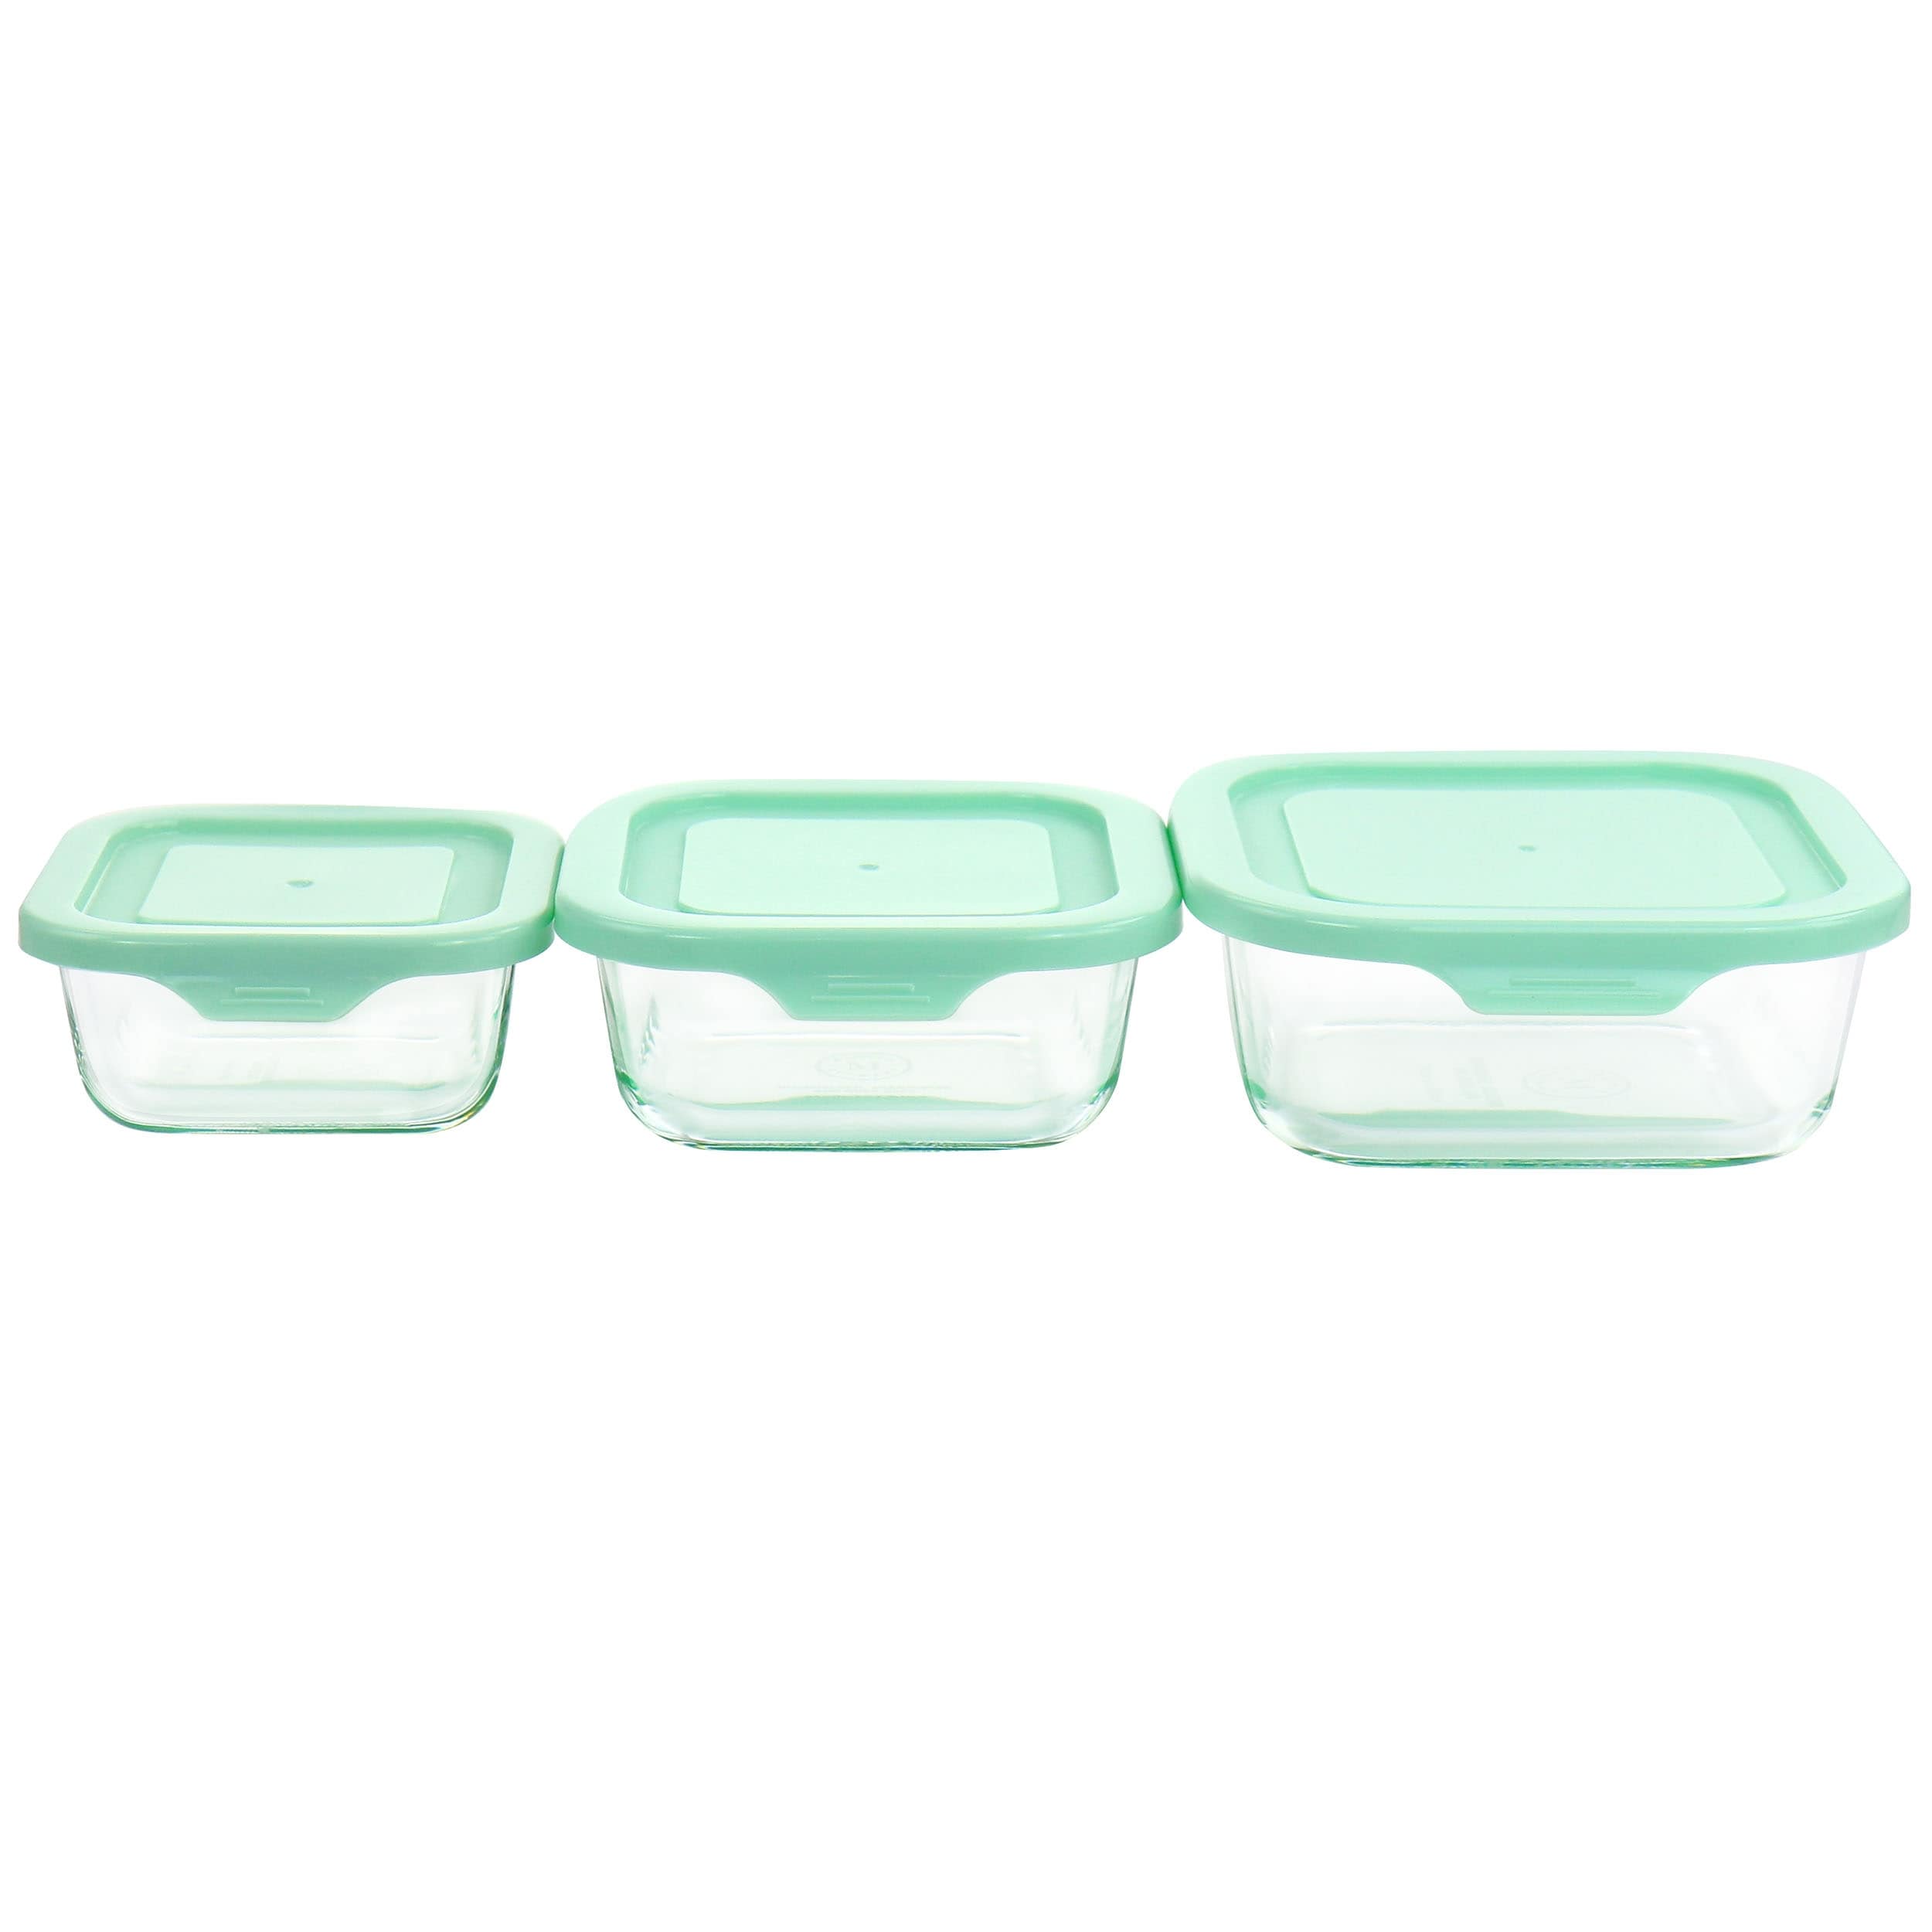 https://ak1.ostkcdn.com/images/products/is/images/direct/3f71ac3a3af25b727c61748b6ce5cf731dcdb3c7/6-Piece-Glass-Storage-Containers-with-Lids-in-Mint.jpg